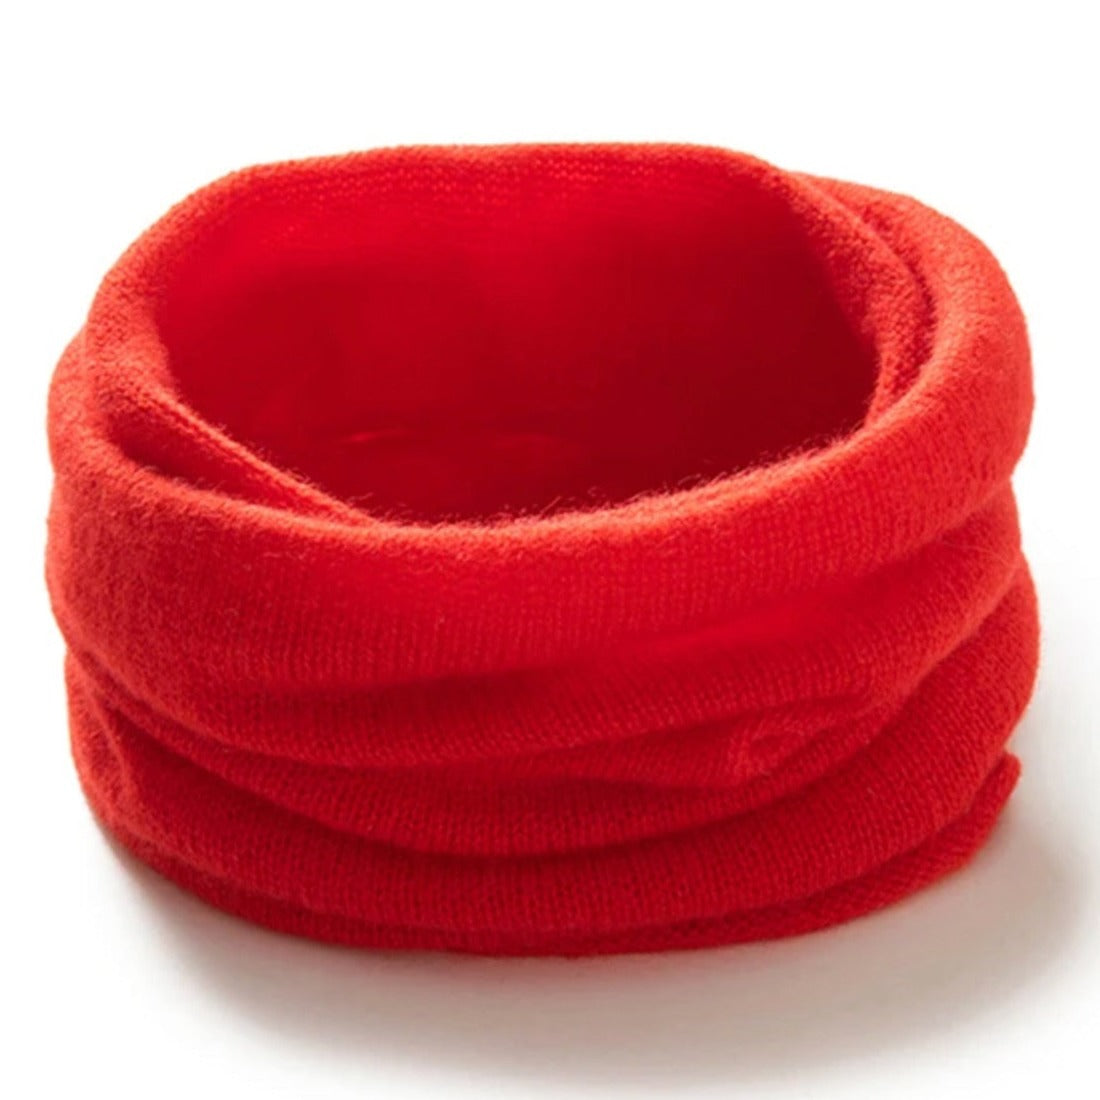 Red Natural 100% cashmere neck warmer, shop Canada cashmere clothes, scarves, shawls